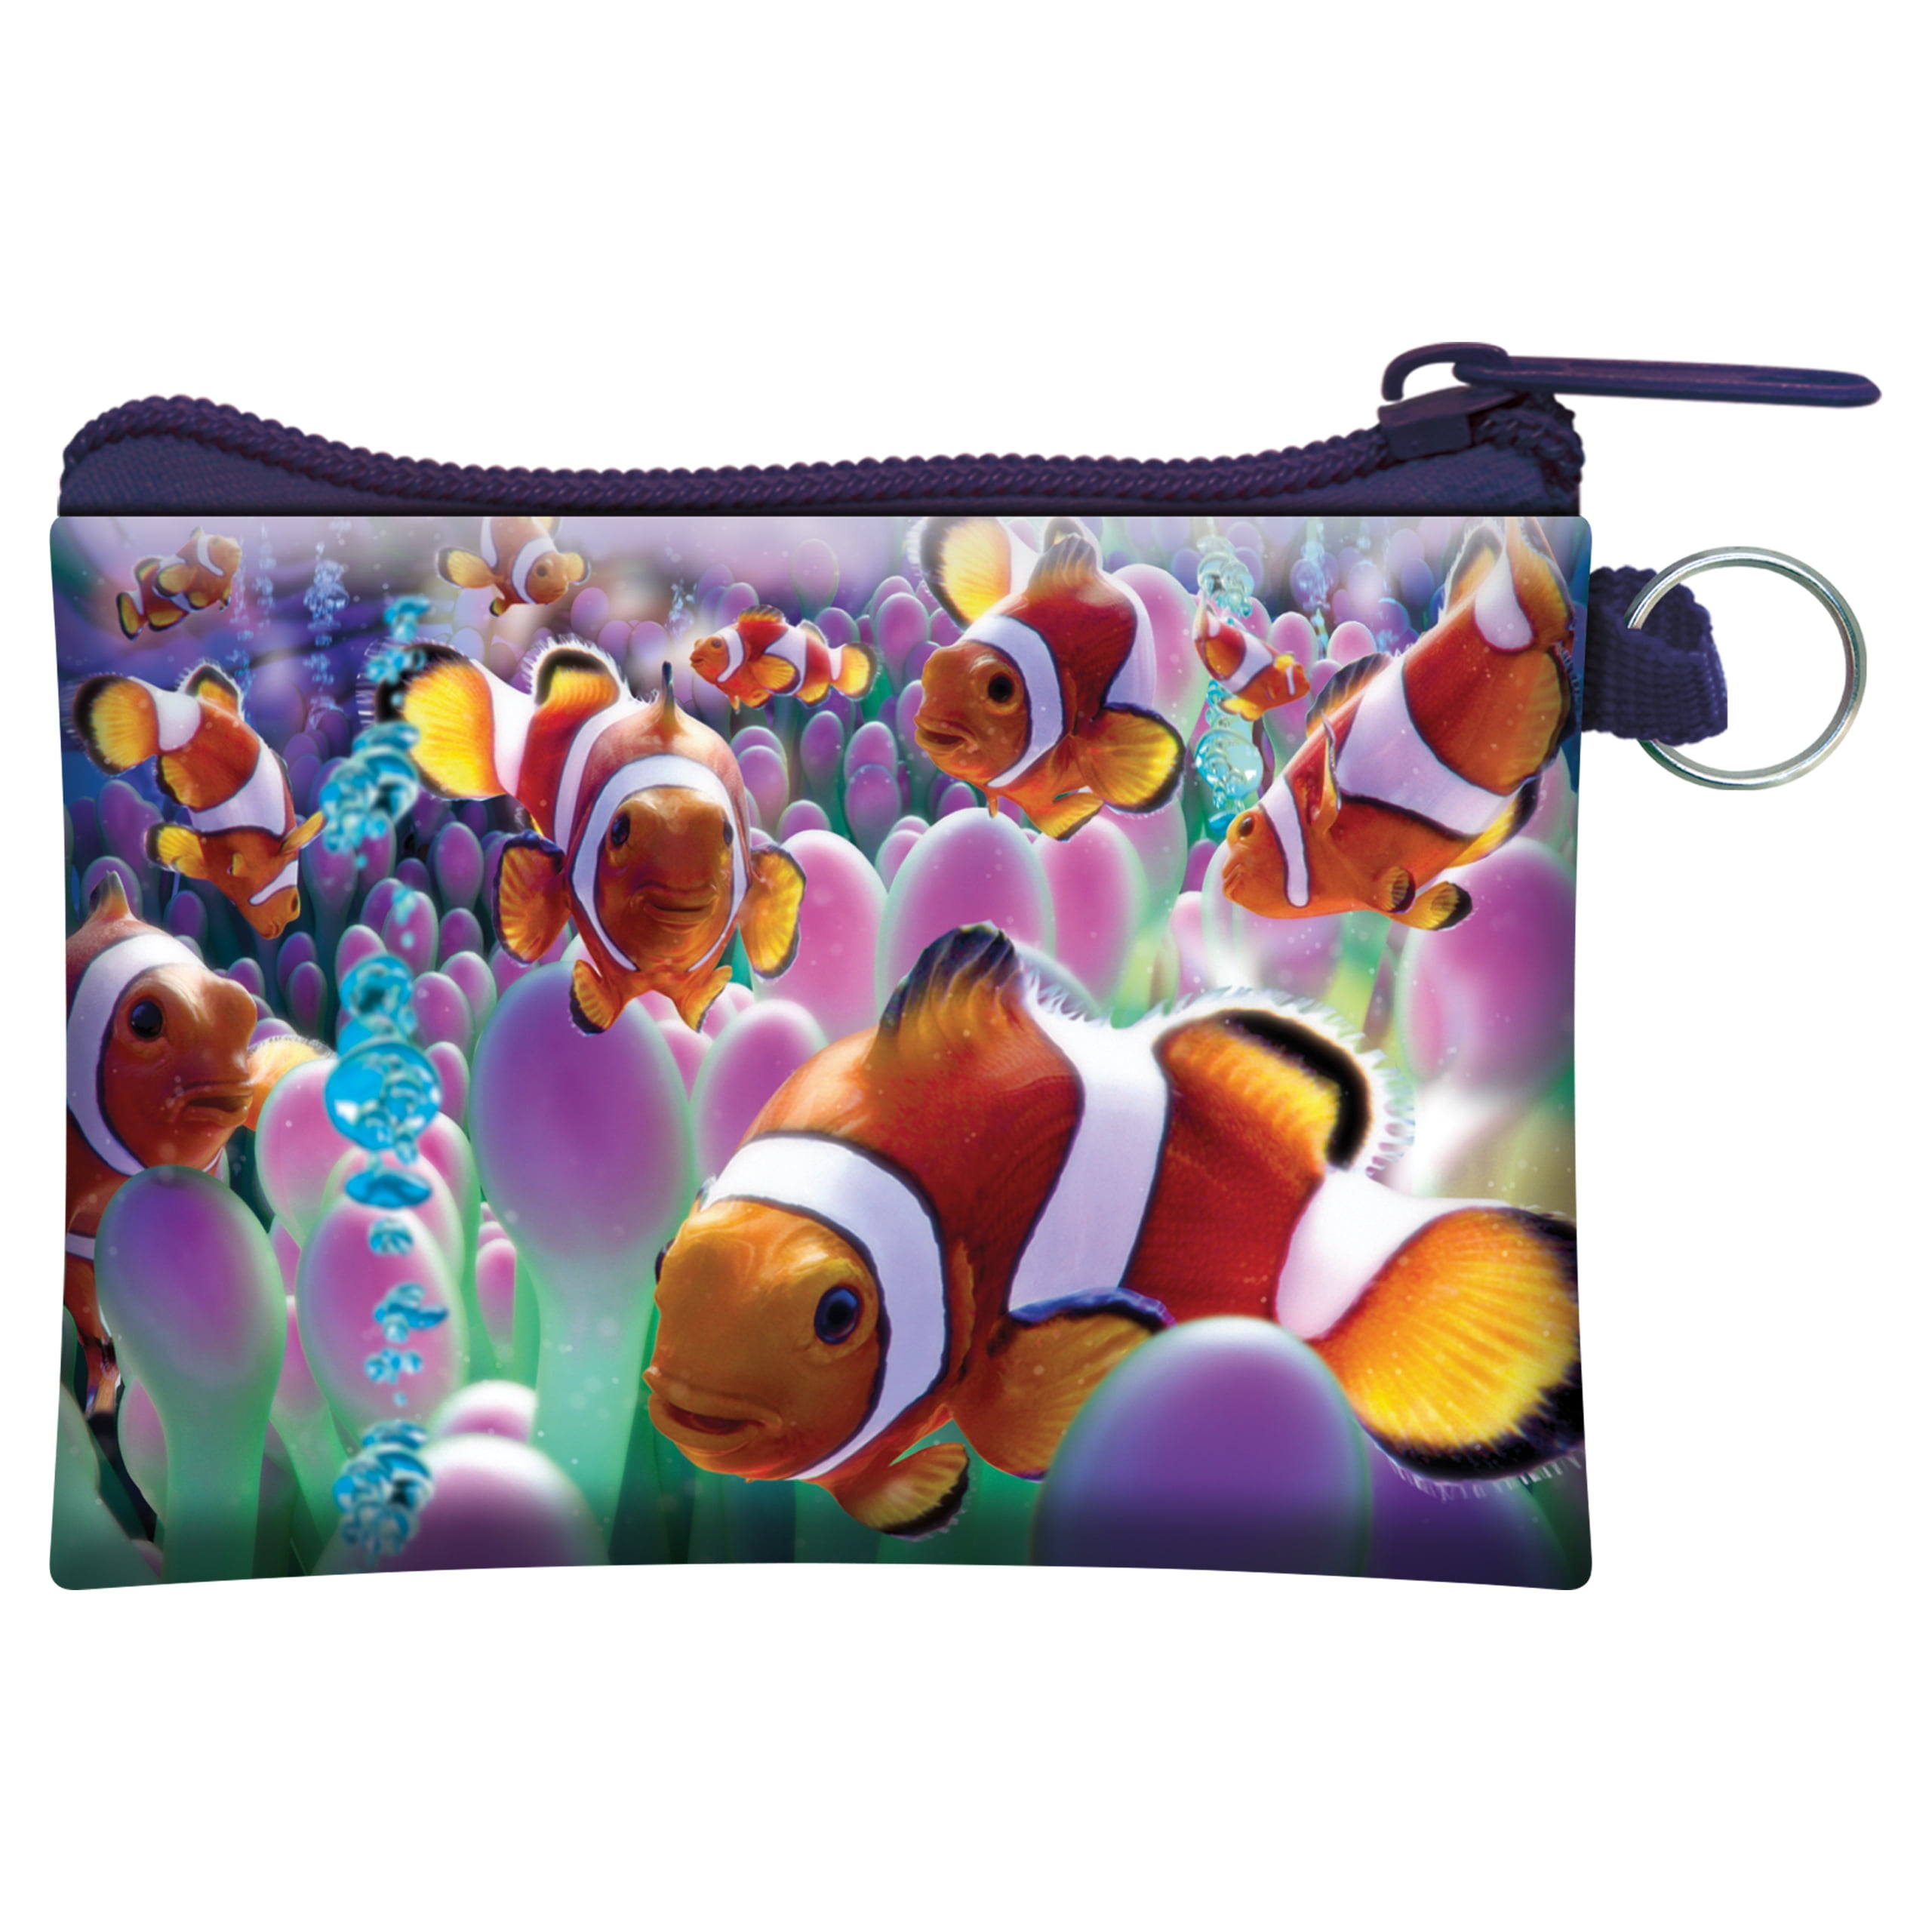 3D LiveLife Coin Purse - Clown Fish from Deluxebase. Lenticular 3D ...